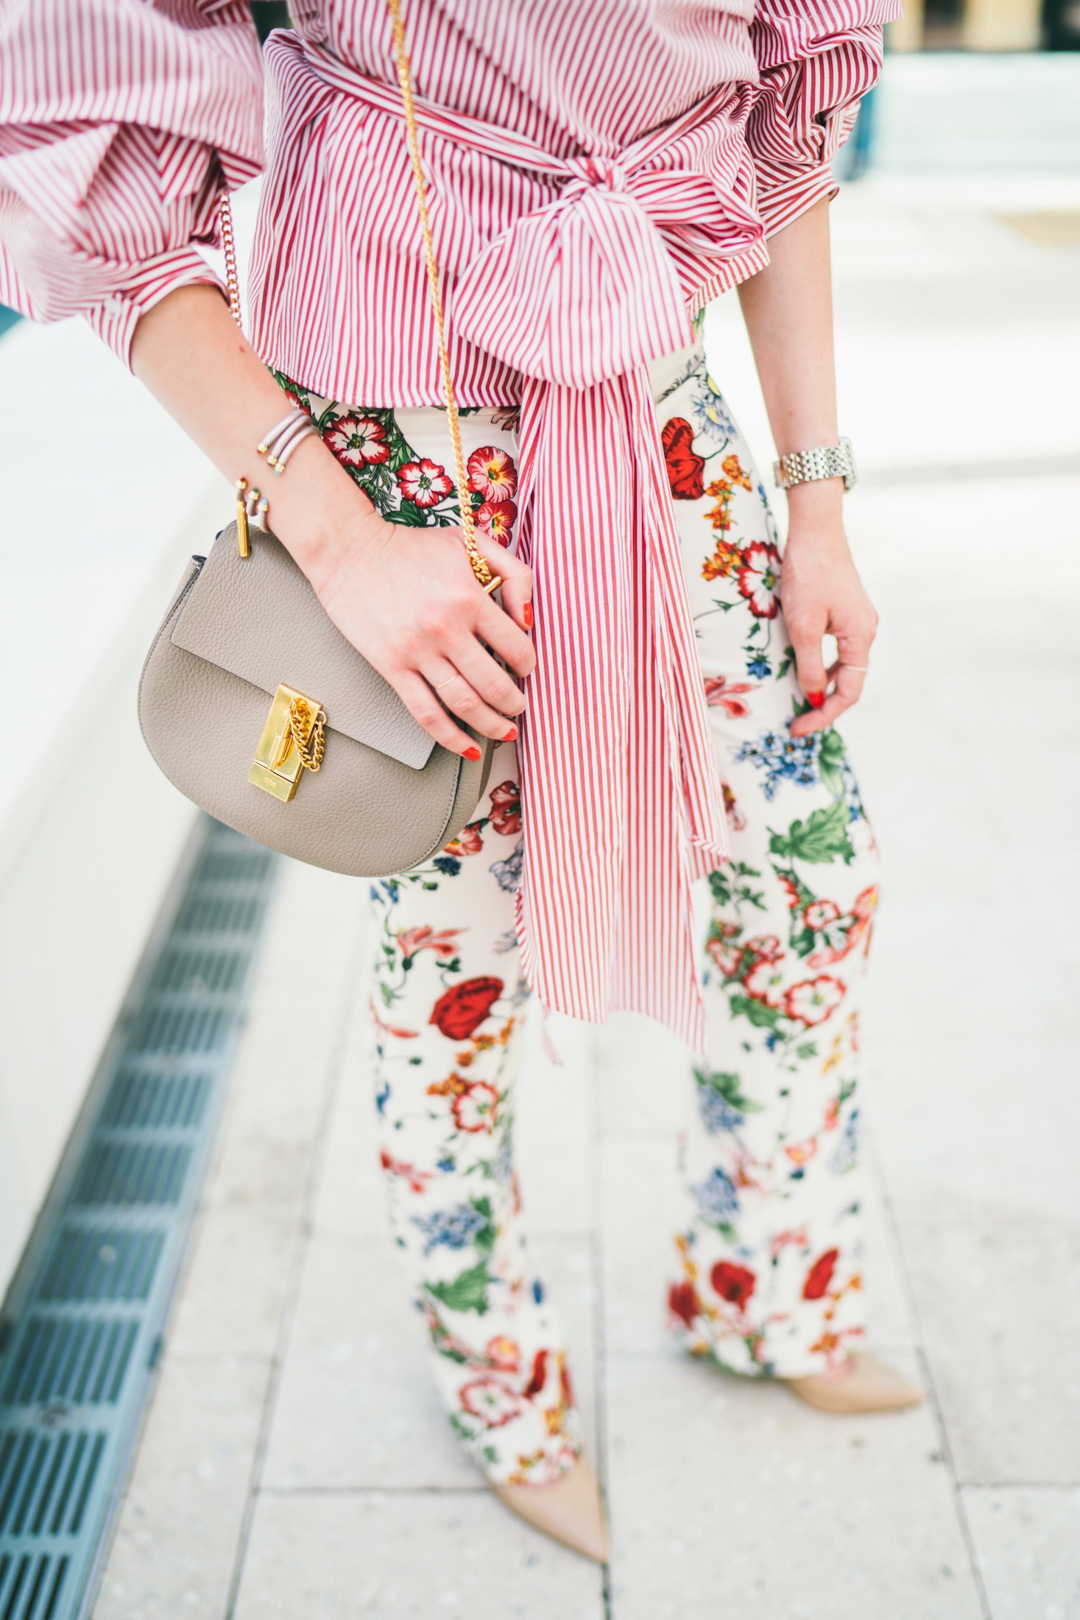 Jackie Roque mixing prints in Miami with the Chloe Drew Bag.